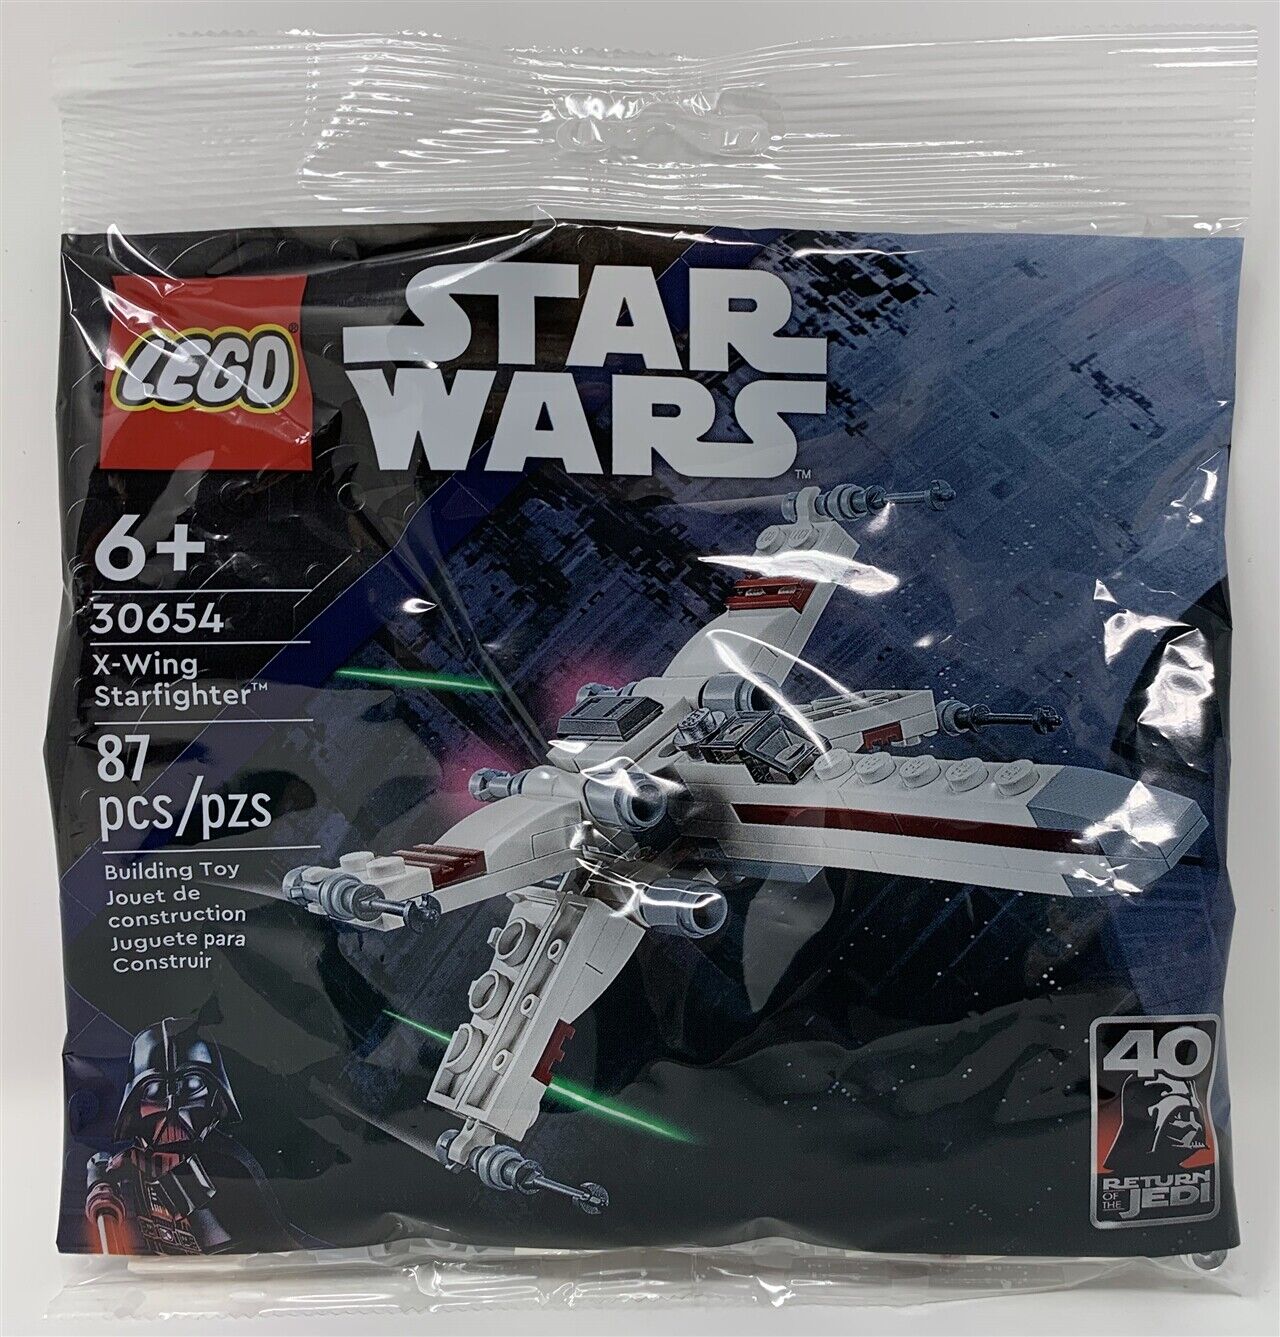 New Sealed Lego 30654 Star Wars X-Wing Starfighter Polybag